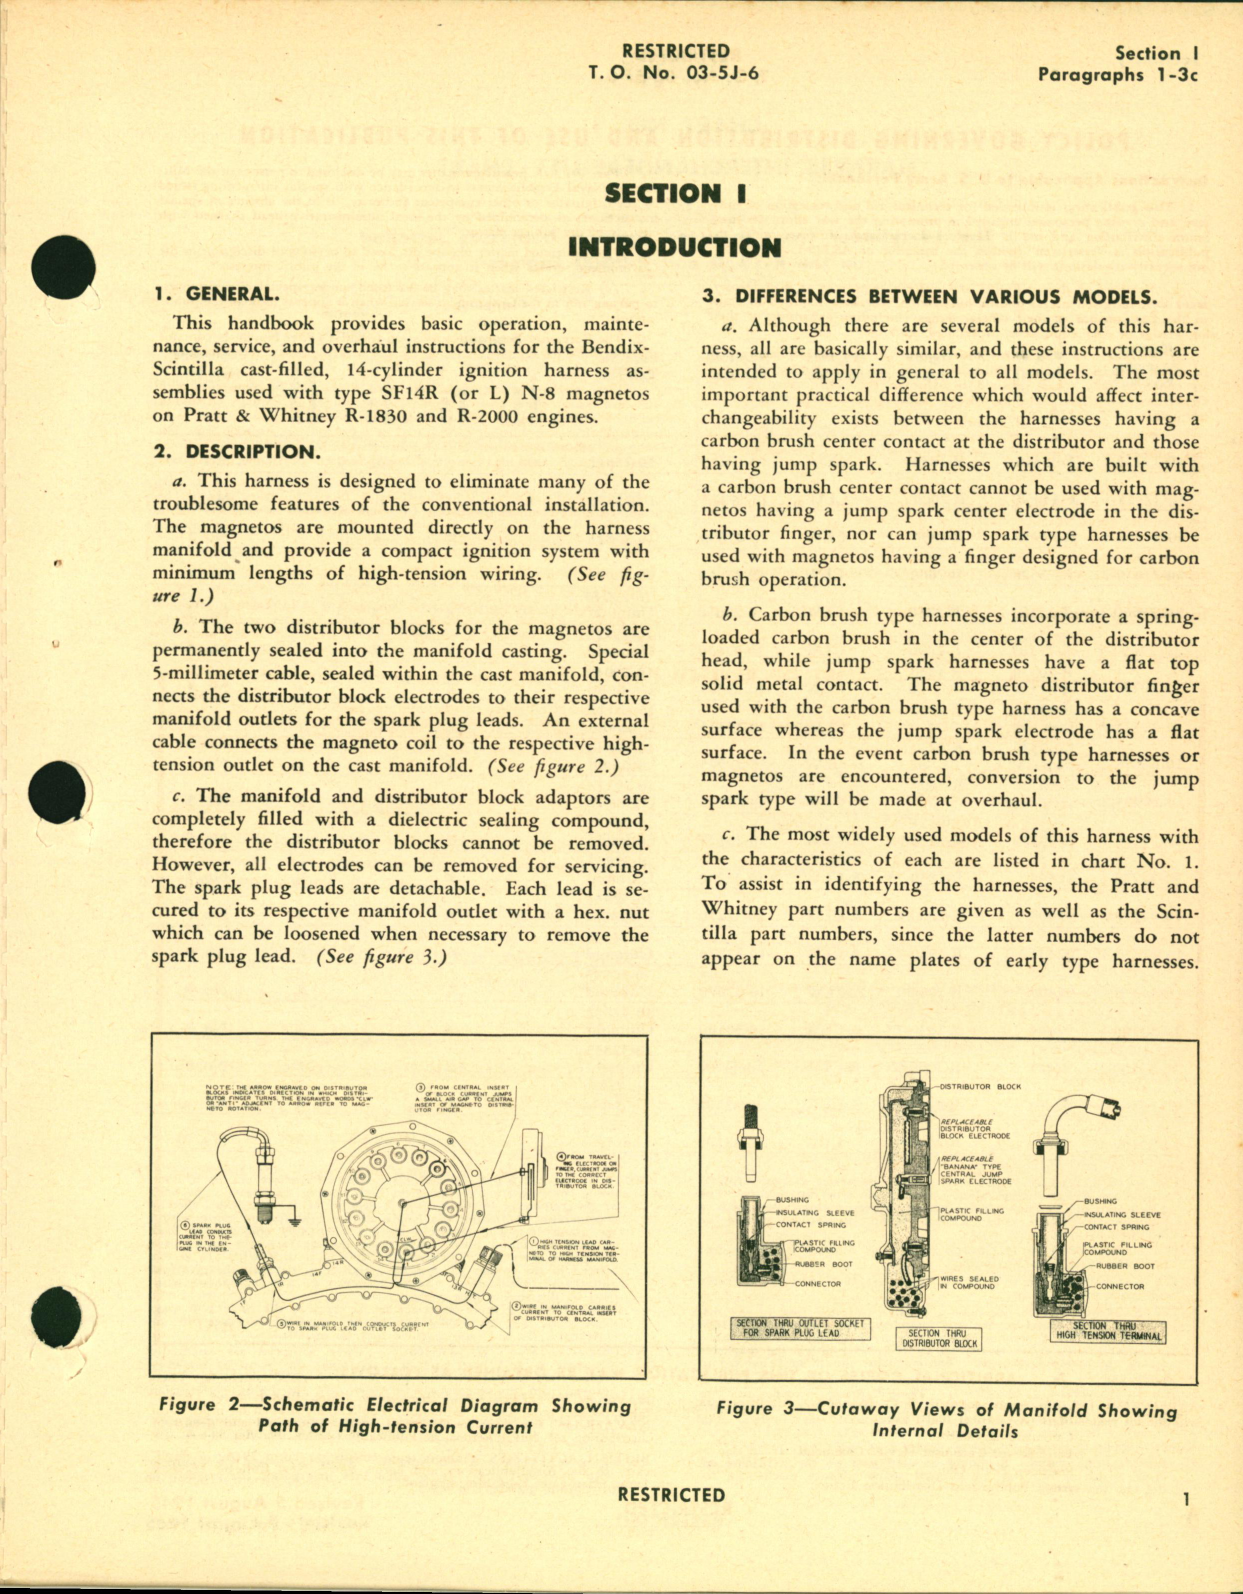 Sample page 5 from AirCorps Library document: Service and Overhaul Instructions for Aircraft Ignition Cast-Filled 14-Cylinder Harness